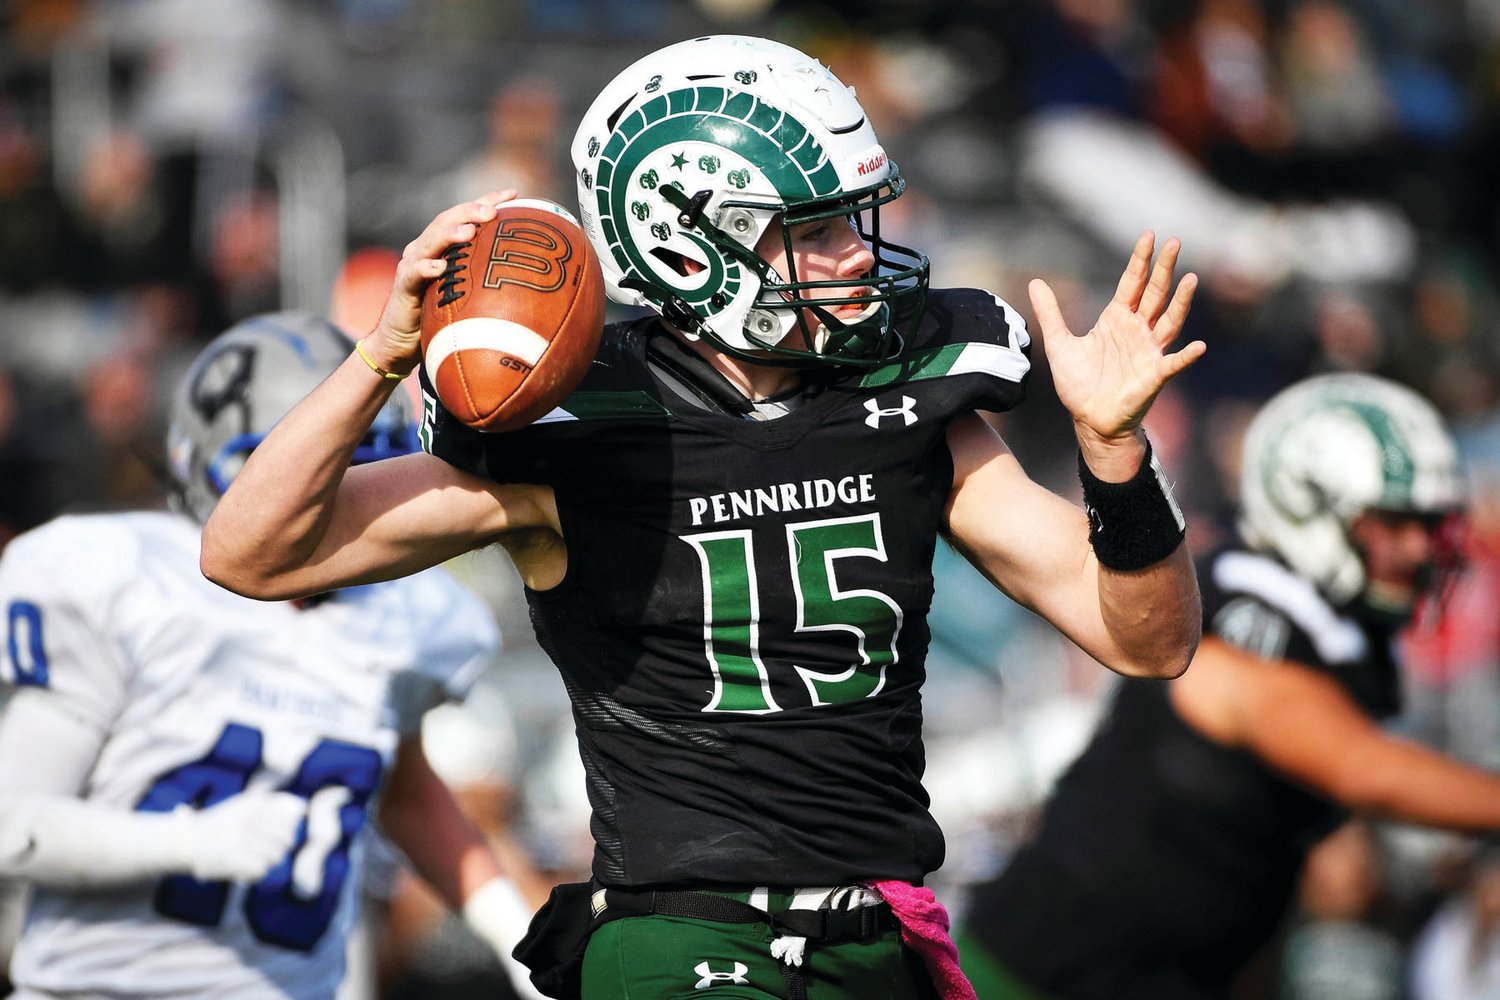 Pennridge’s Logan McGowan opens up the passing game in the fourth quarter.